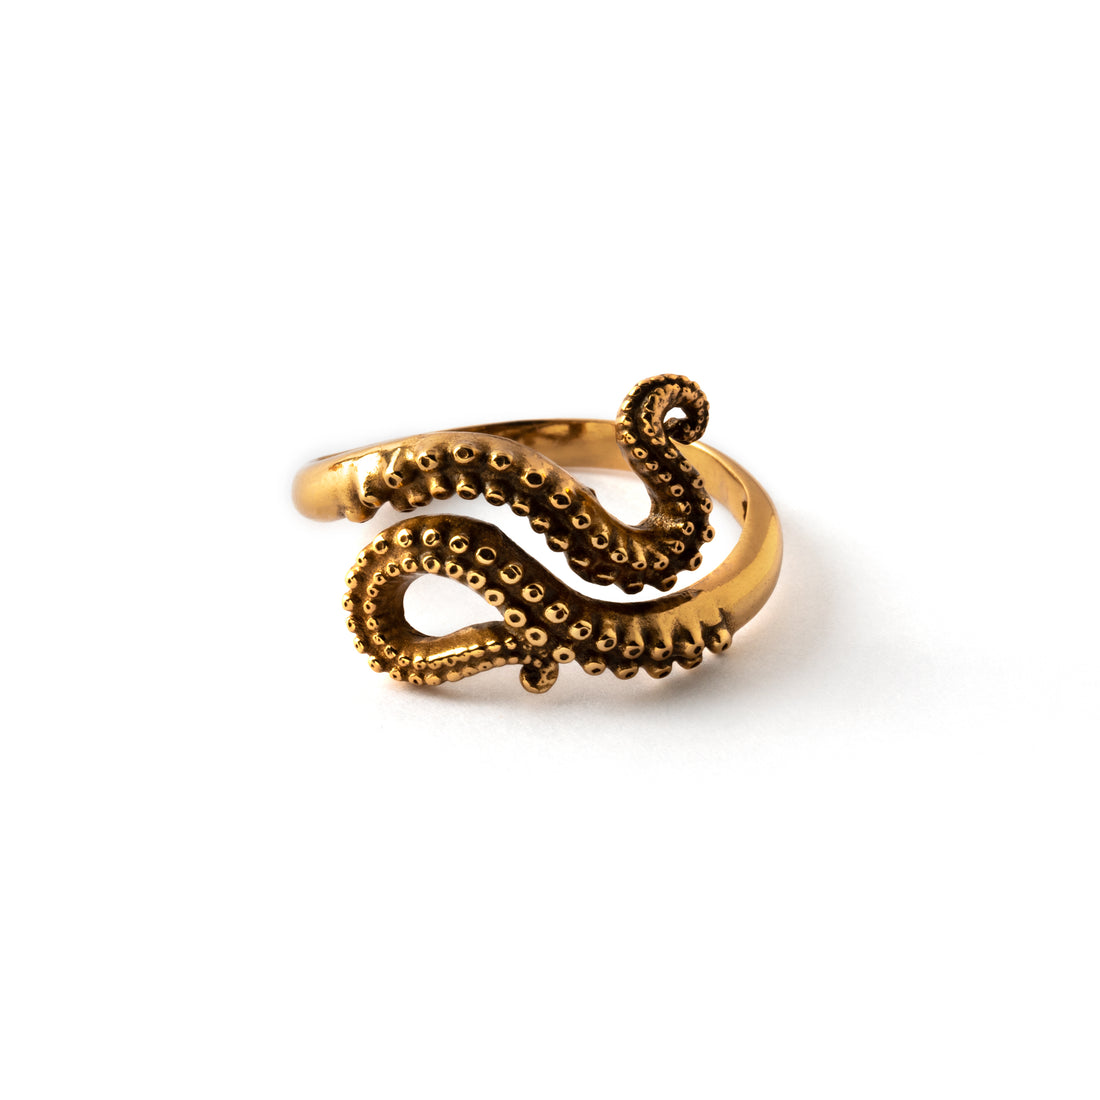 Bronze octopus tentacles wrap ring frontal view